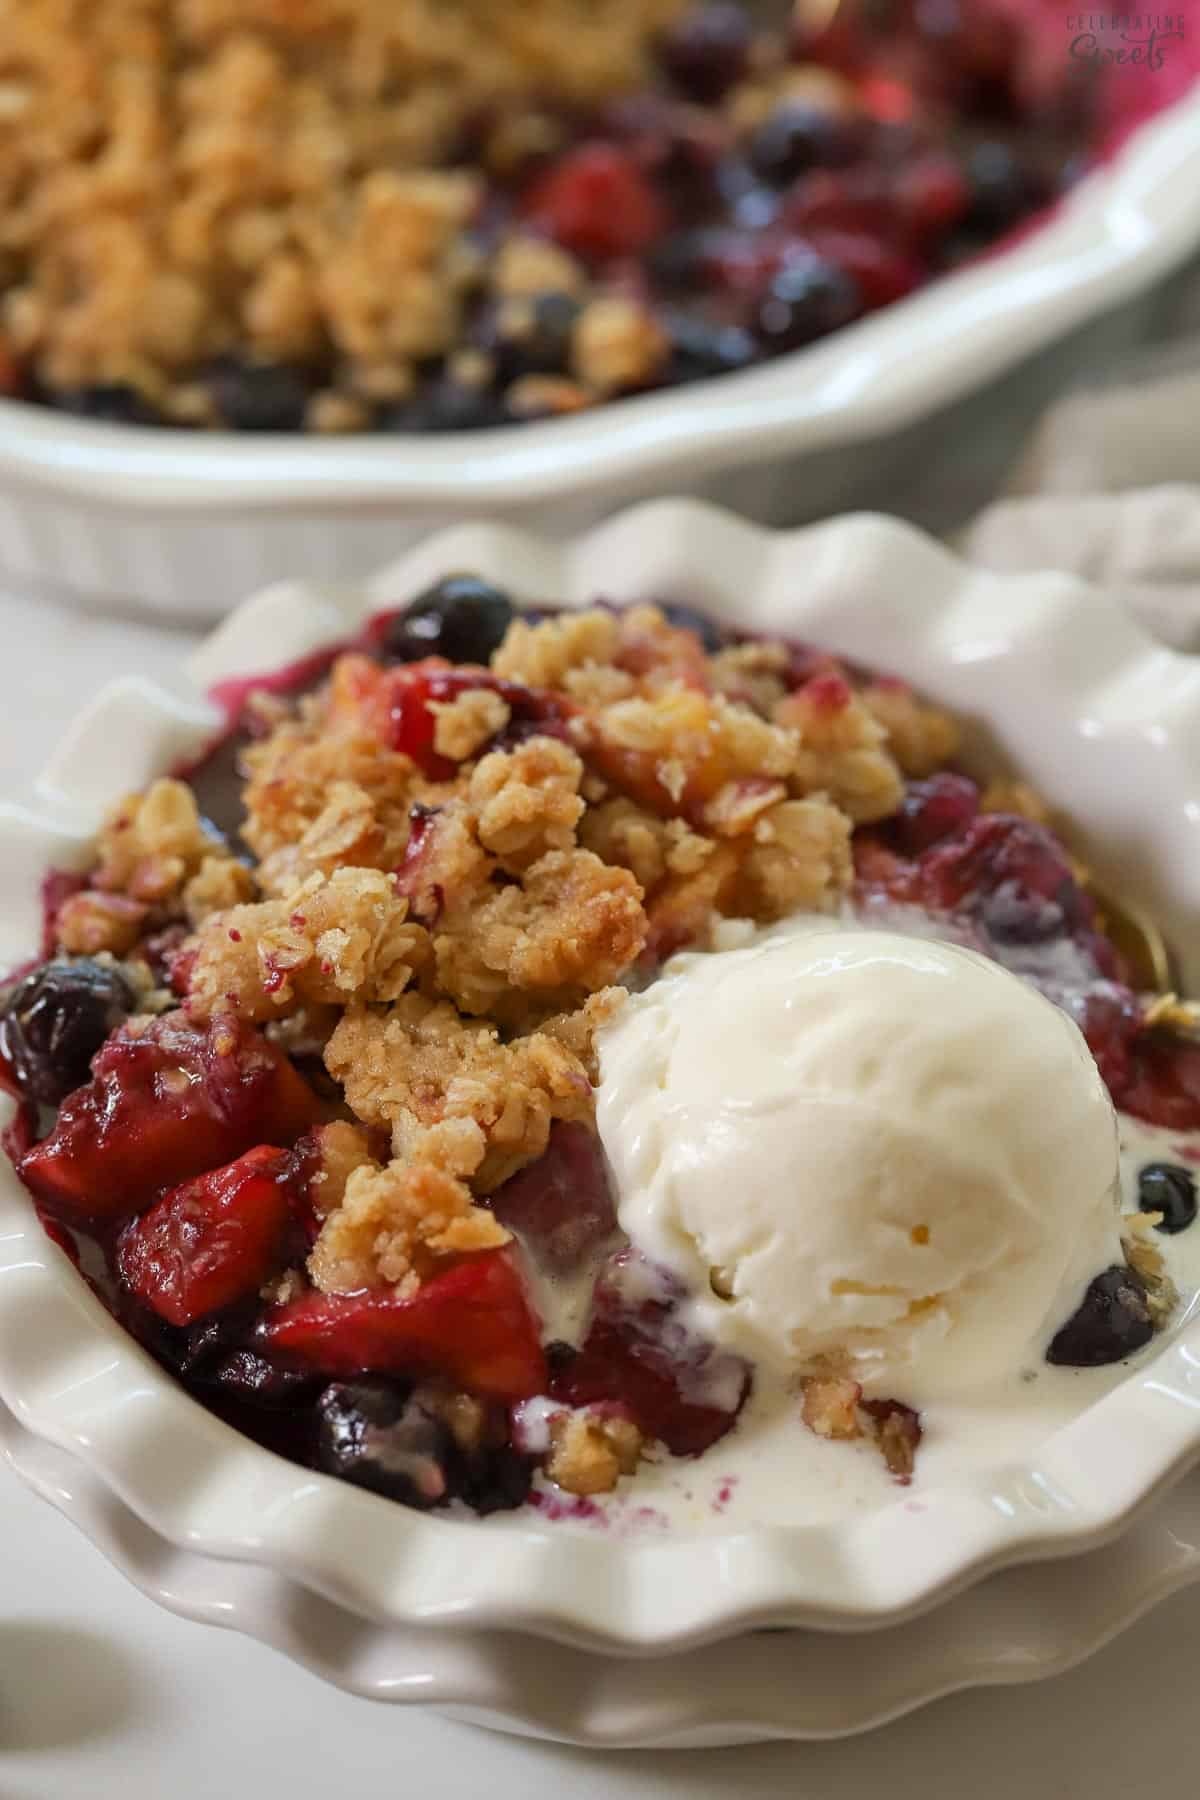 Blueberry peach crisp in a white bowl with a scoop of vanilla ice cream.